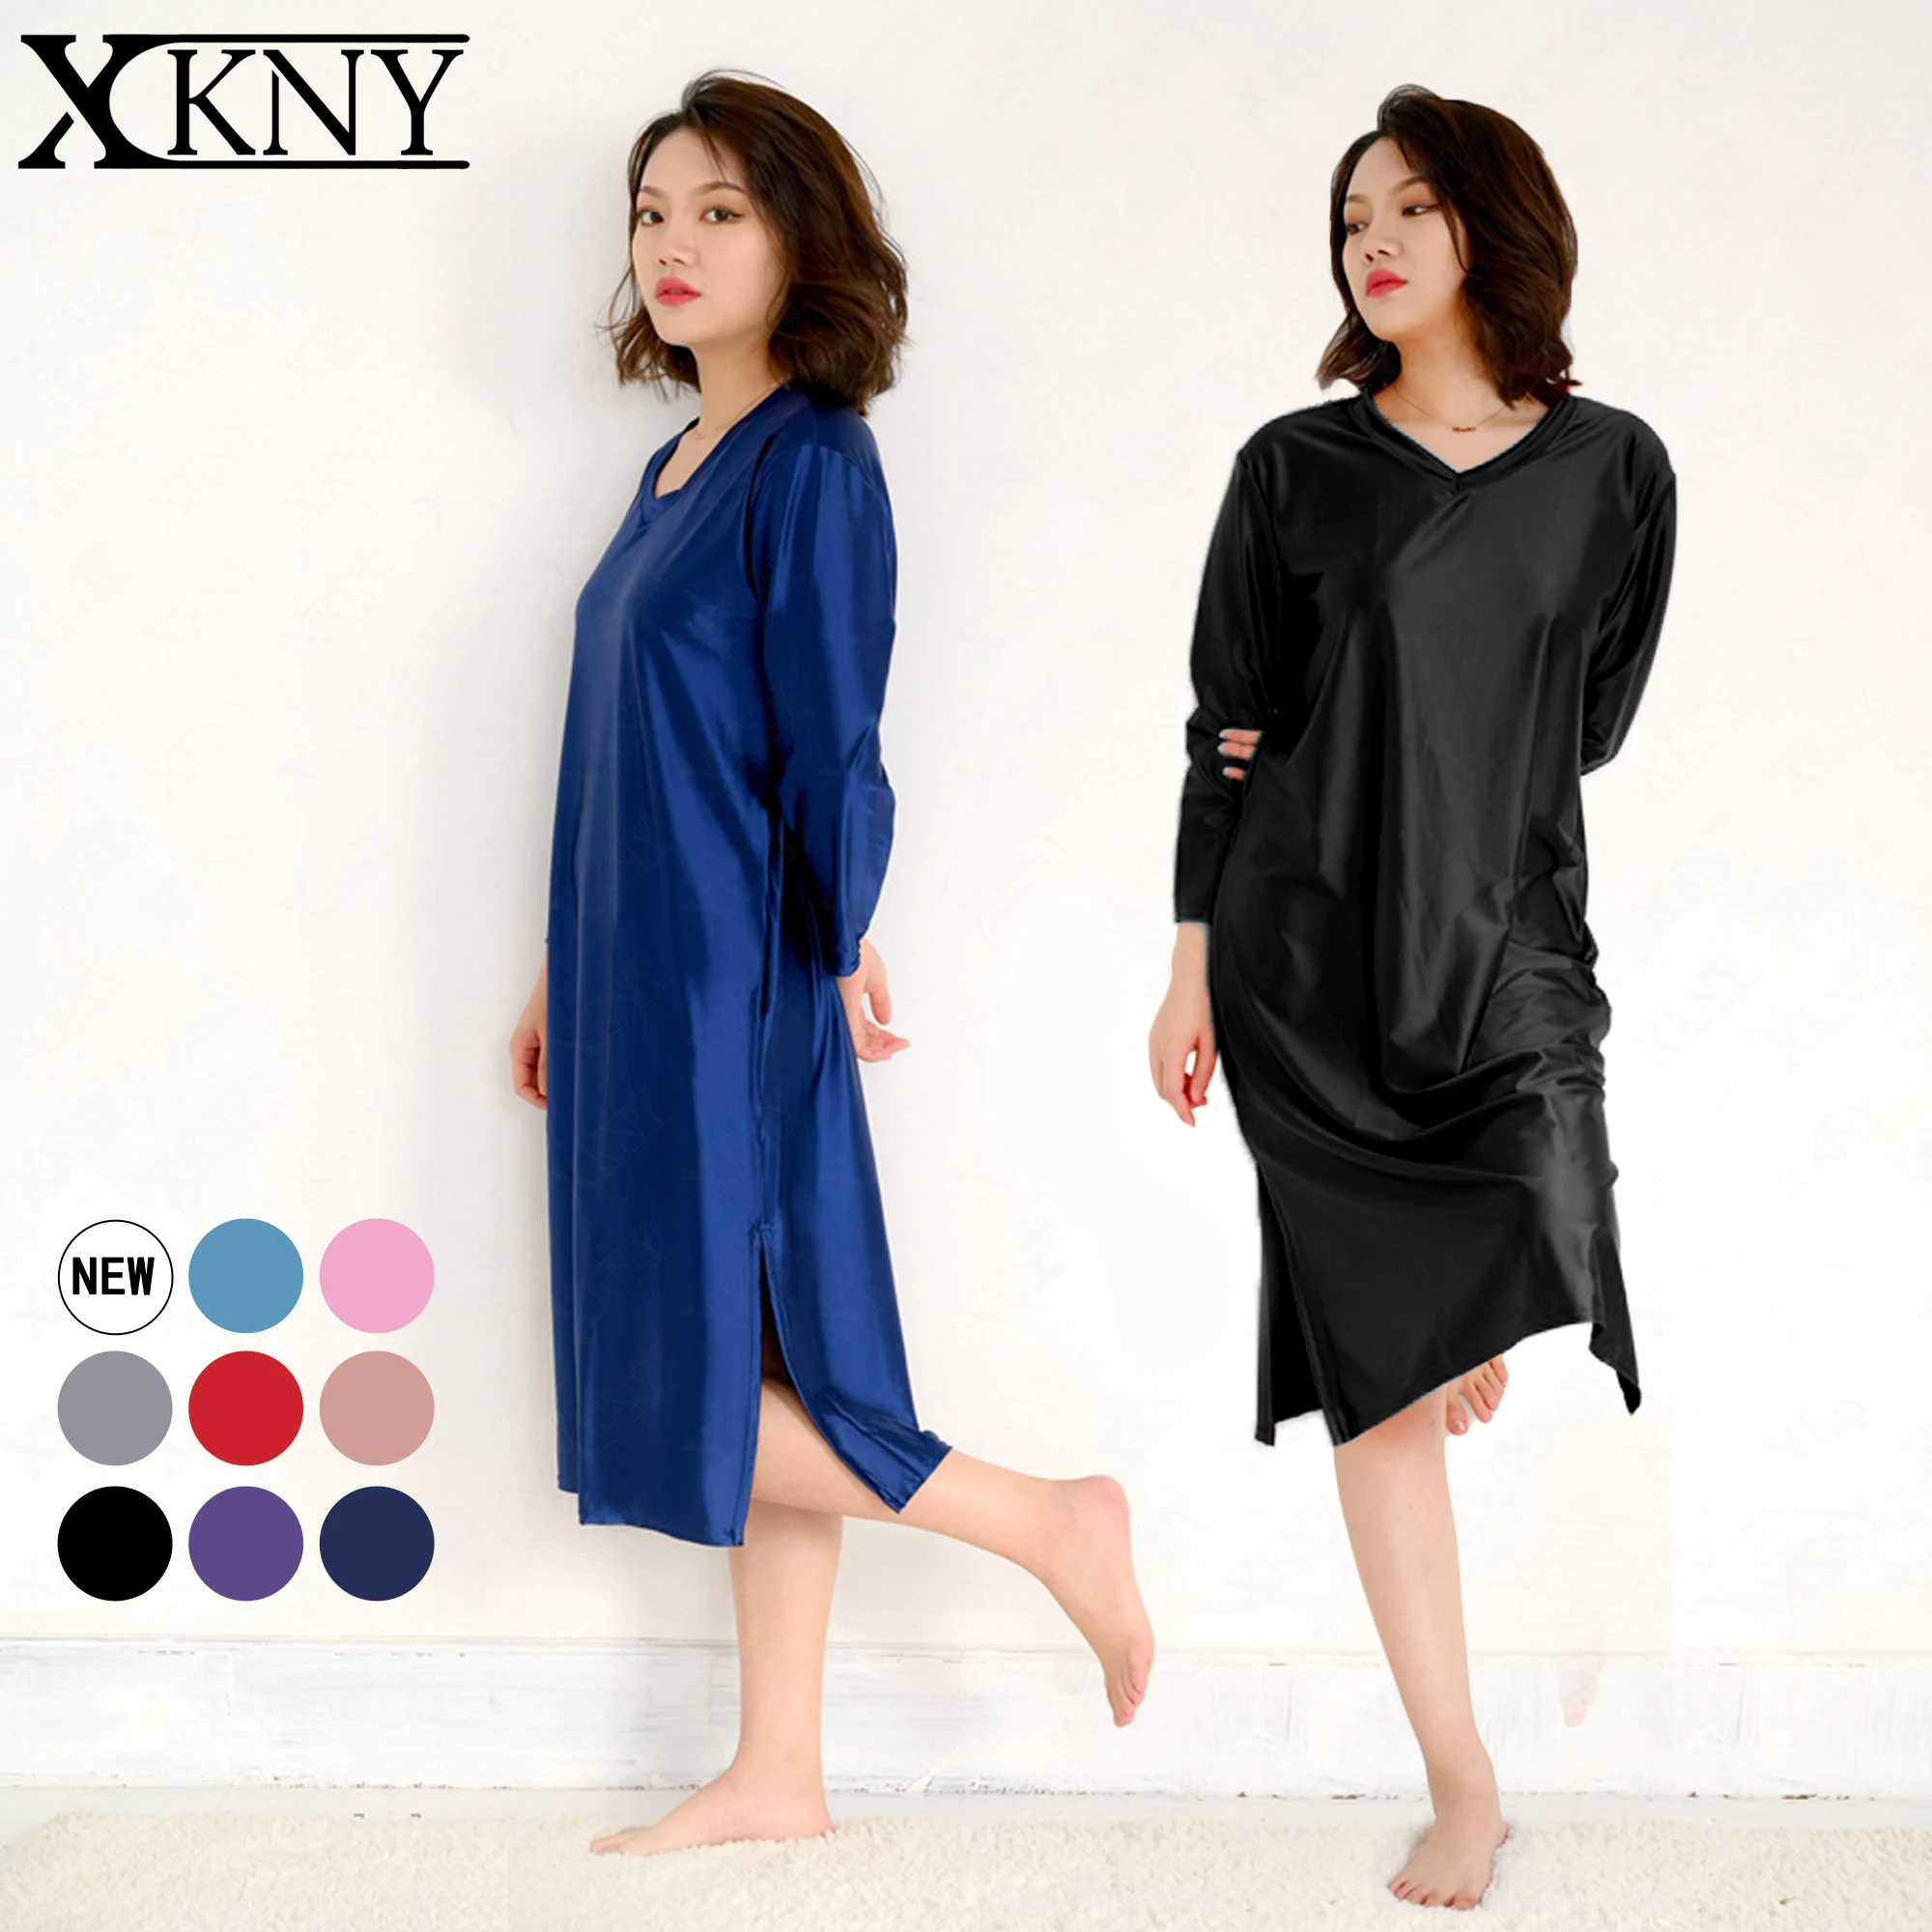 

XCKNY satin Glossy dress smooth long sleeve loose fitting housewear all in one pajamas V-neck comfortable dress Good night dress